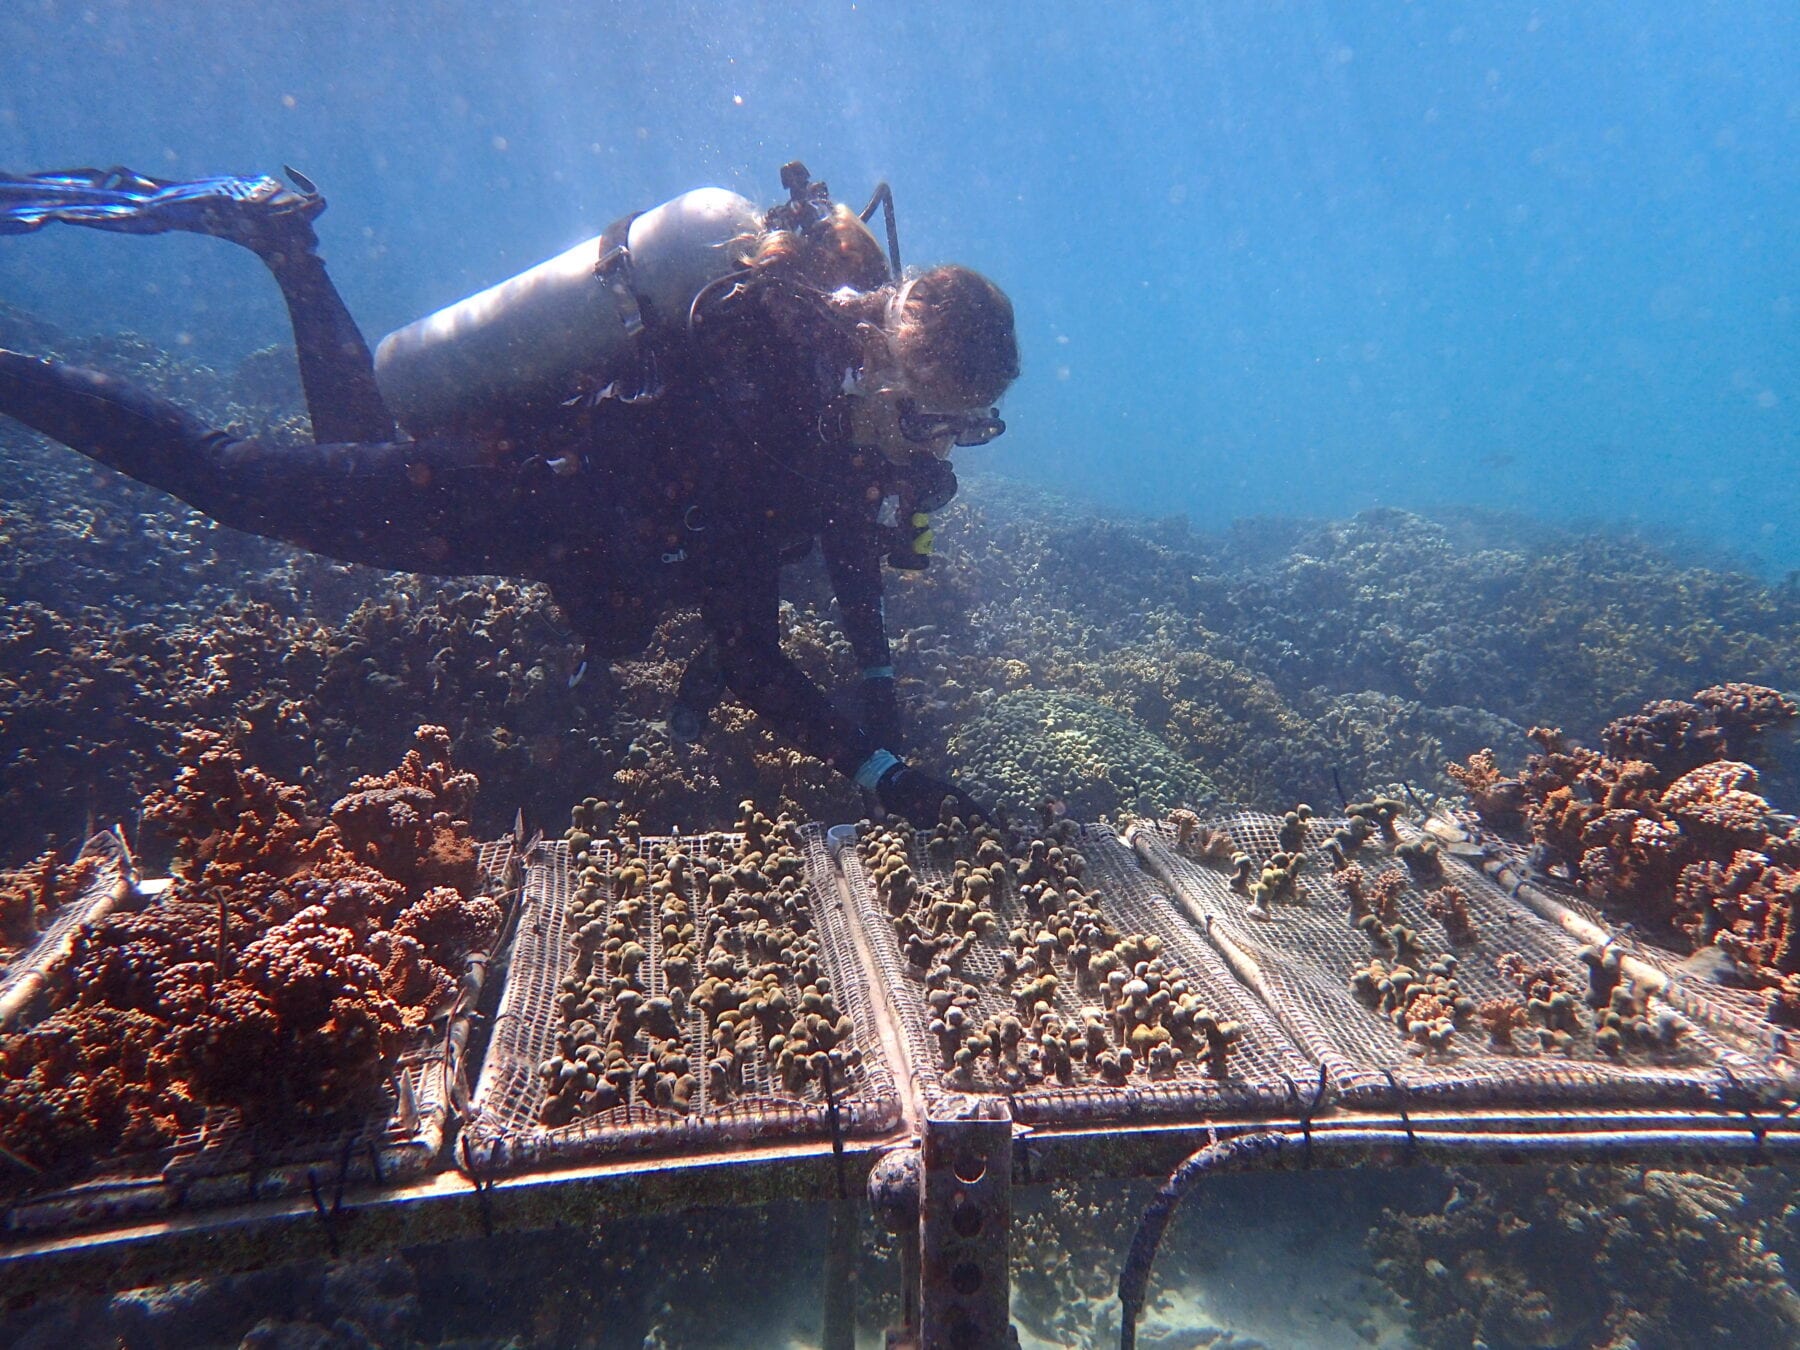 Penn biologist Katie Barott and colleagues found that corals maintain their ability to resist bleaching even when transplanted to a new reef. (Image: S. Matsuda)